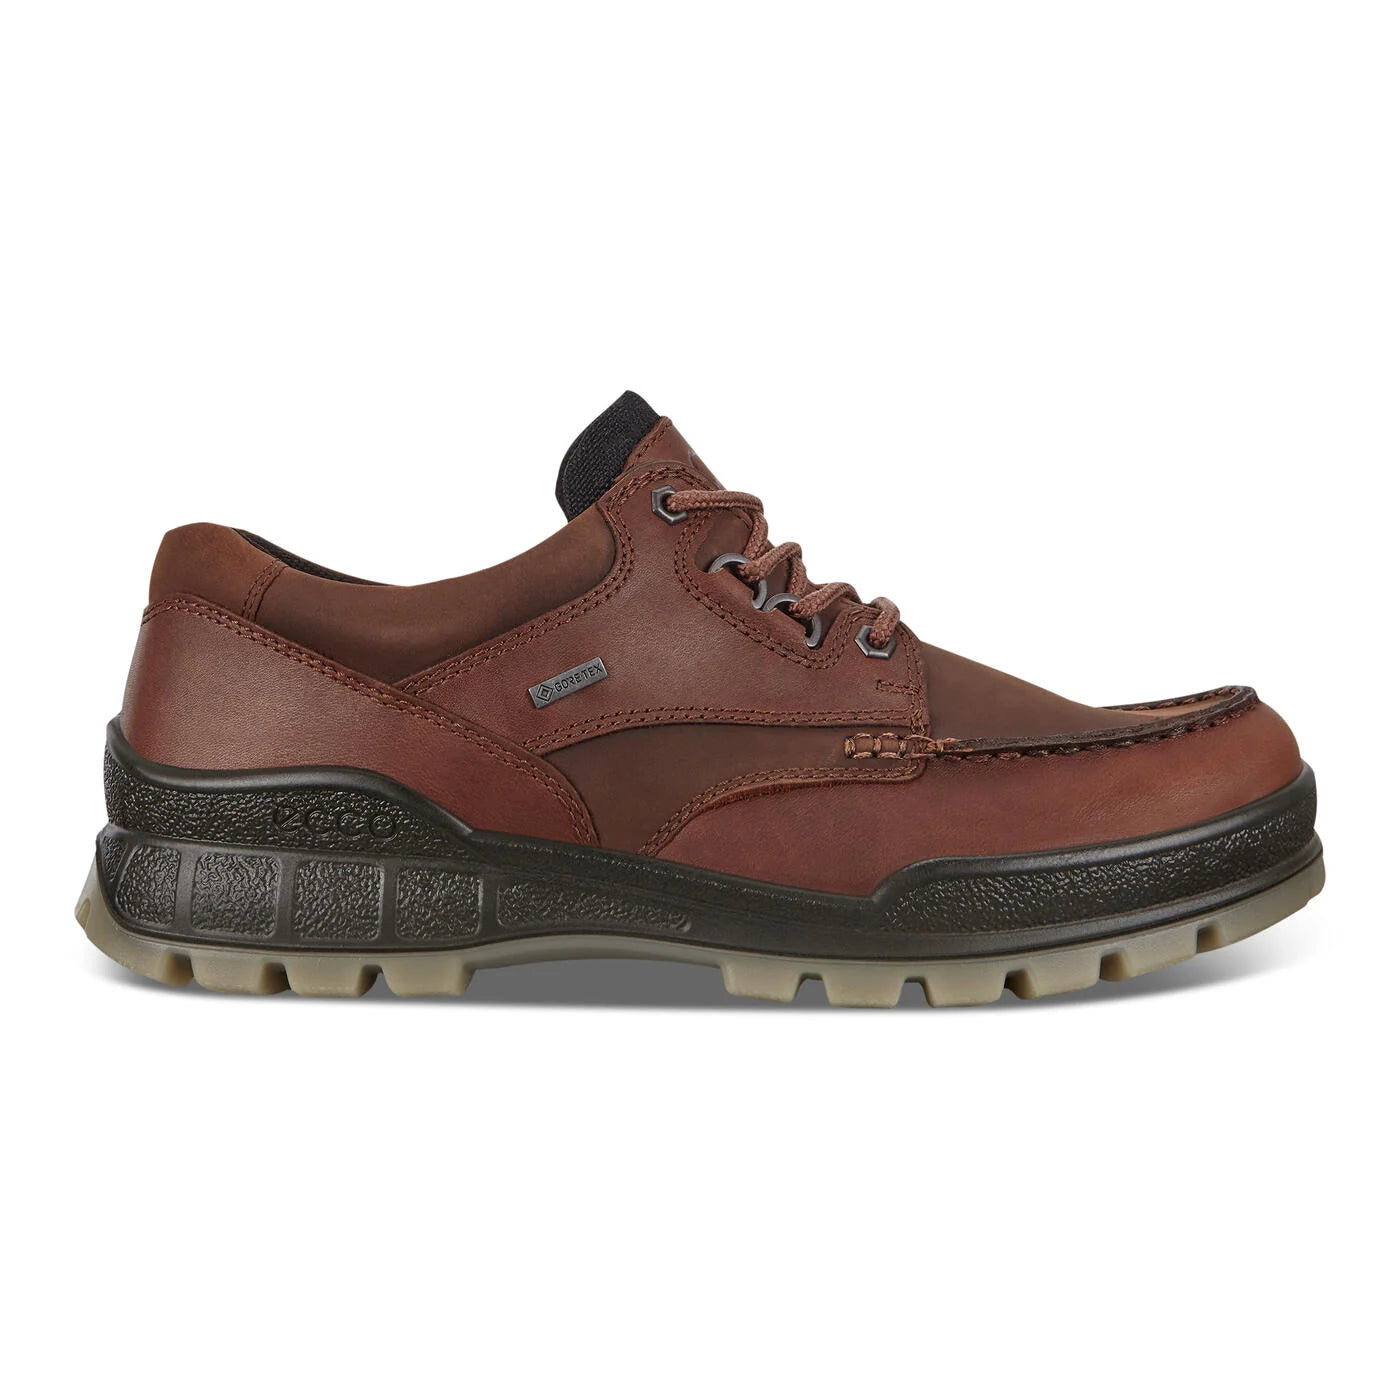 Ecco' Track 25 WP Toe Mid Hiker Bison – Trav's Outfitter